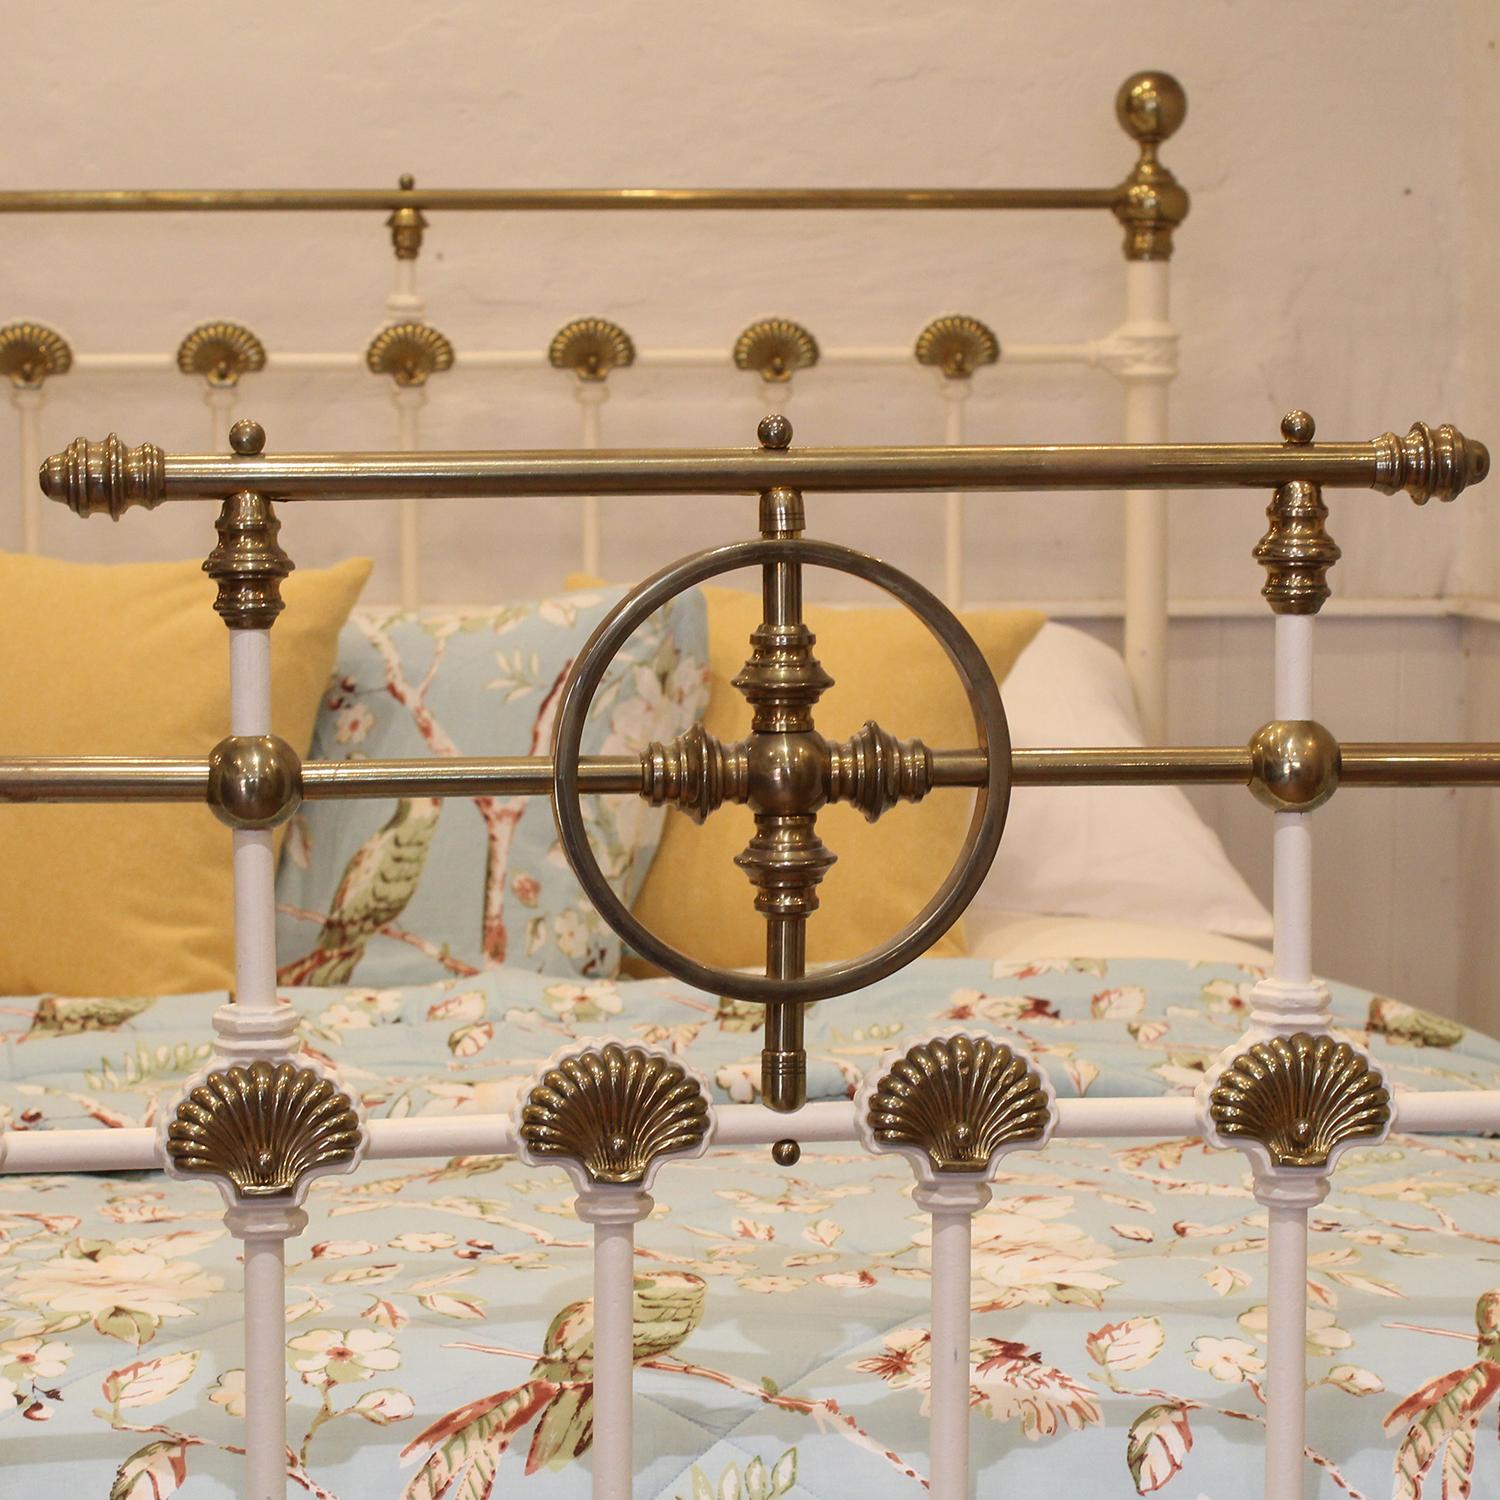 19th Century Double Brass & Iron Bed in White, MD123